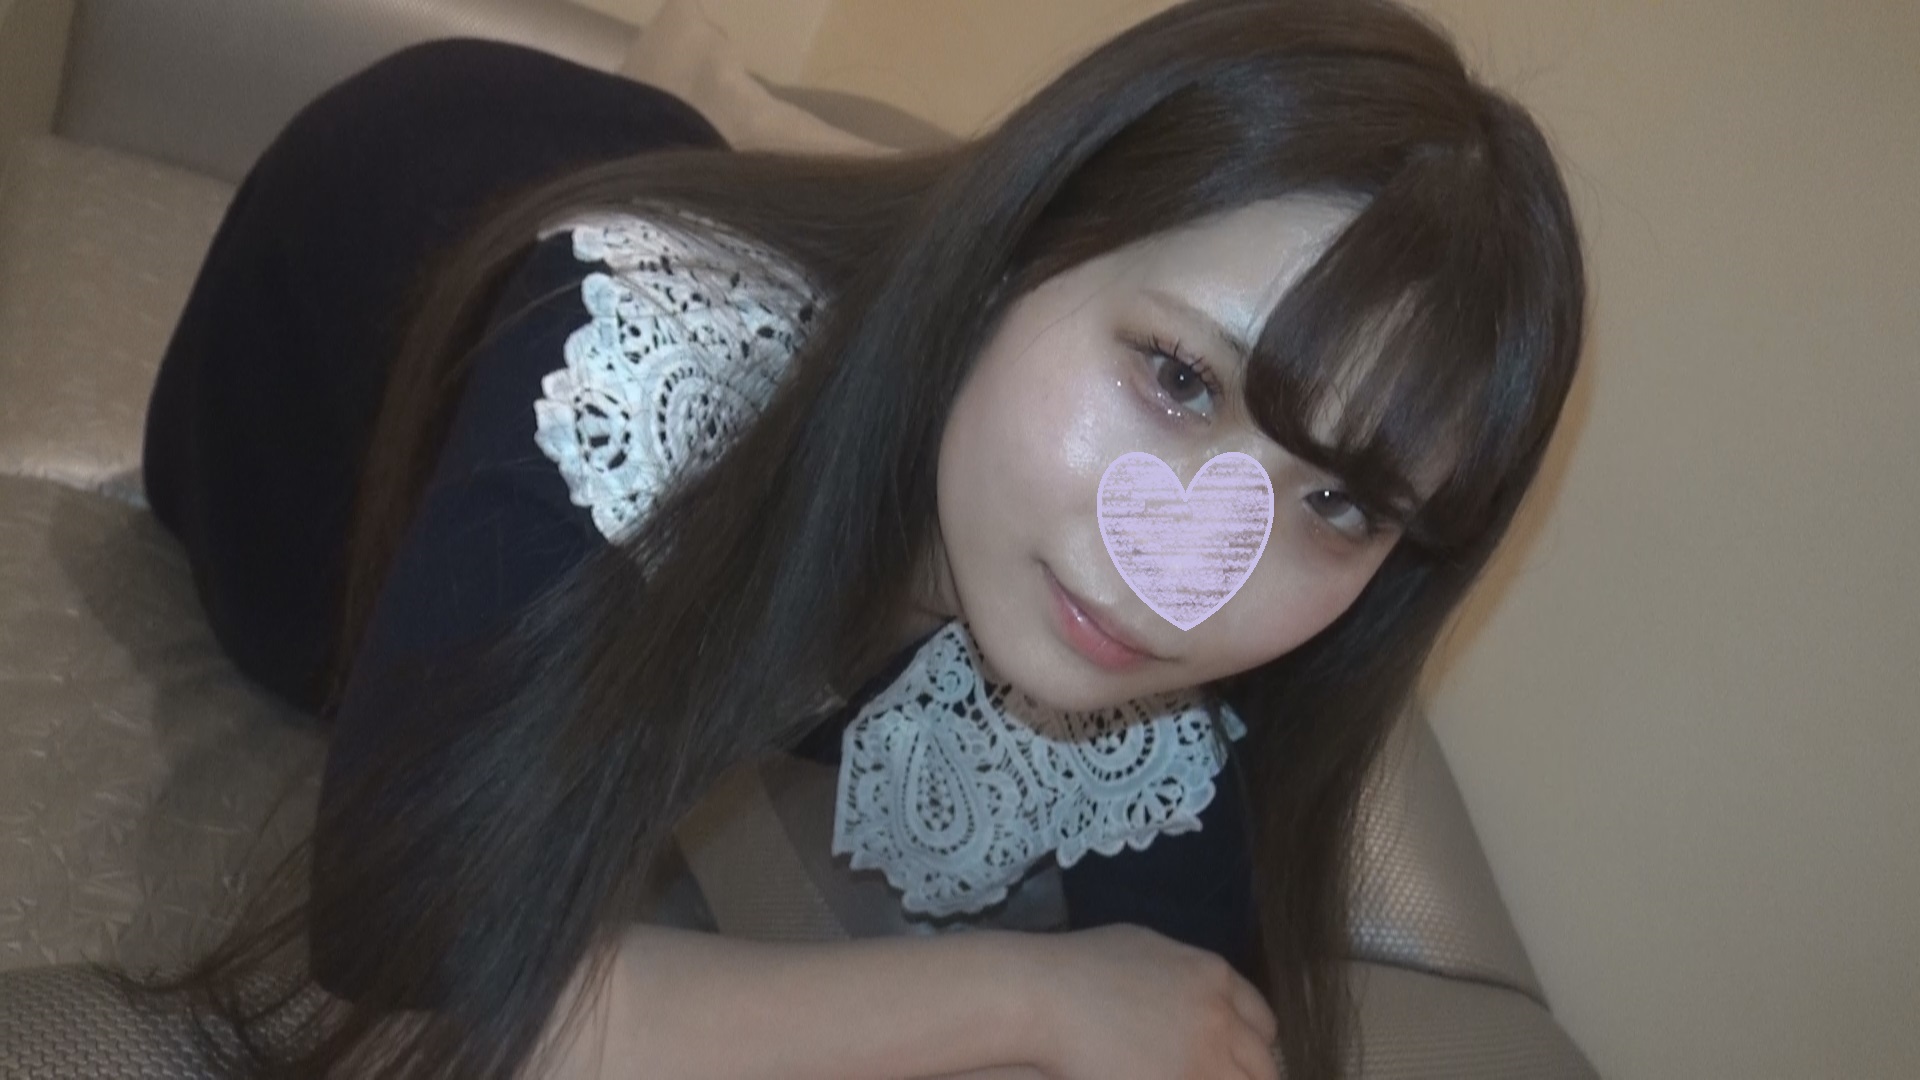 Personal shooting Karin 23 years old Neat and clean loli system loose fluffy slender beautiful girl mass cum shot - Part 2